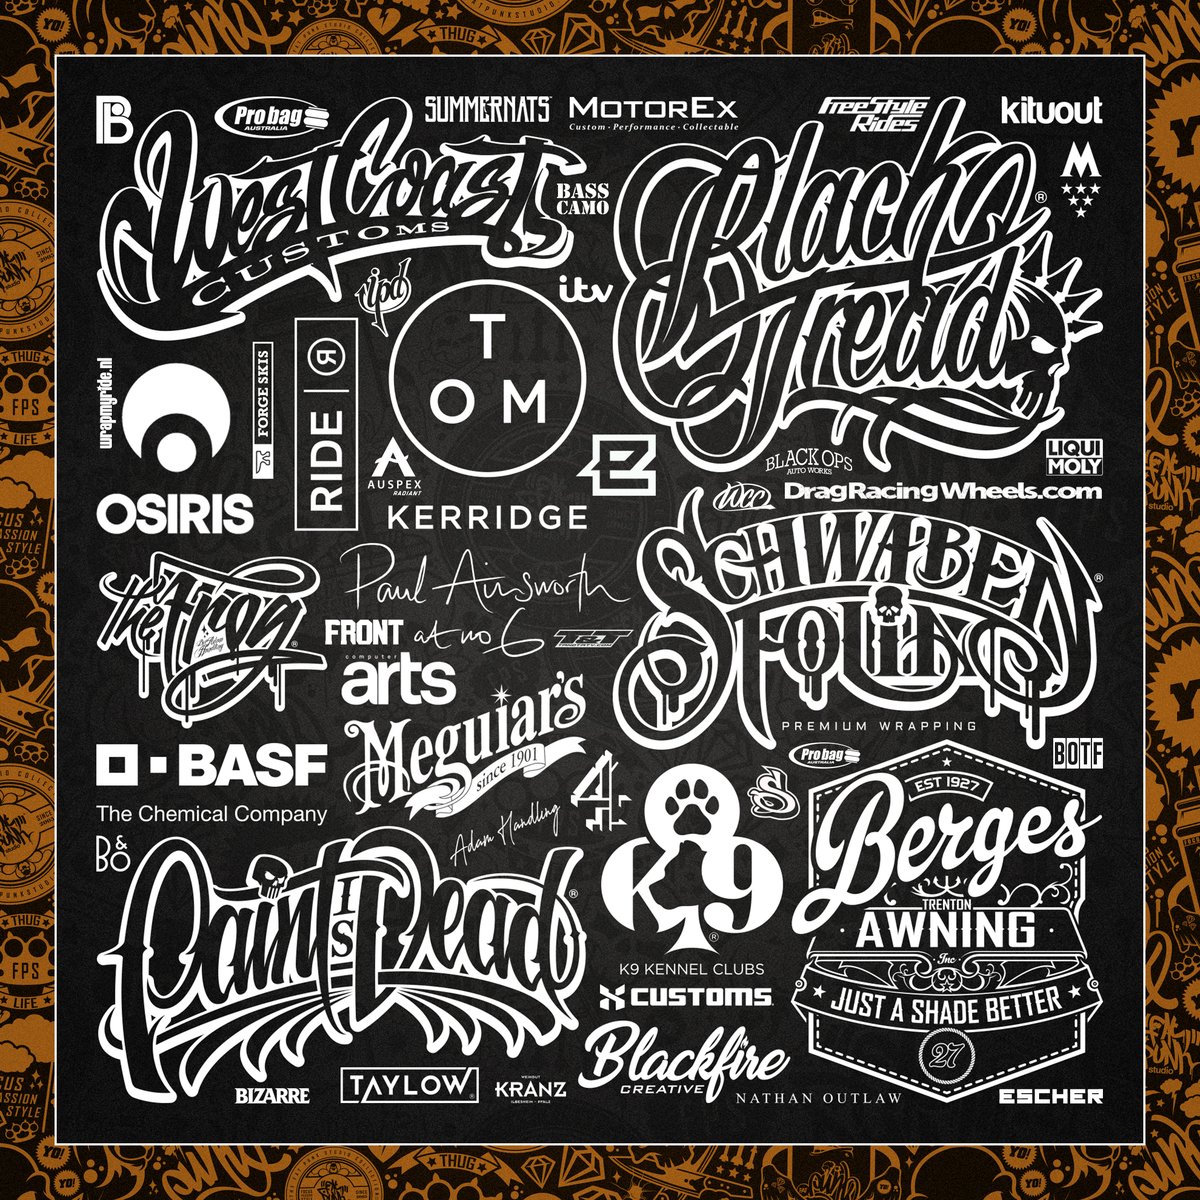 Our #clients are everything to us ~ Check out some of the cool brands we have worked with over the years. 
•
#happyclients #fatpunkstudio #clientswehavehelped #clientsfirst #clientspotlight #clientsatisfaction #lovemyclients #clientes